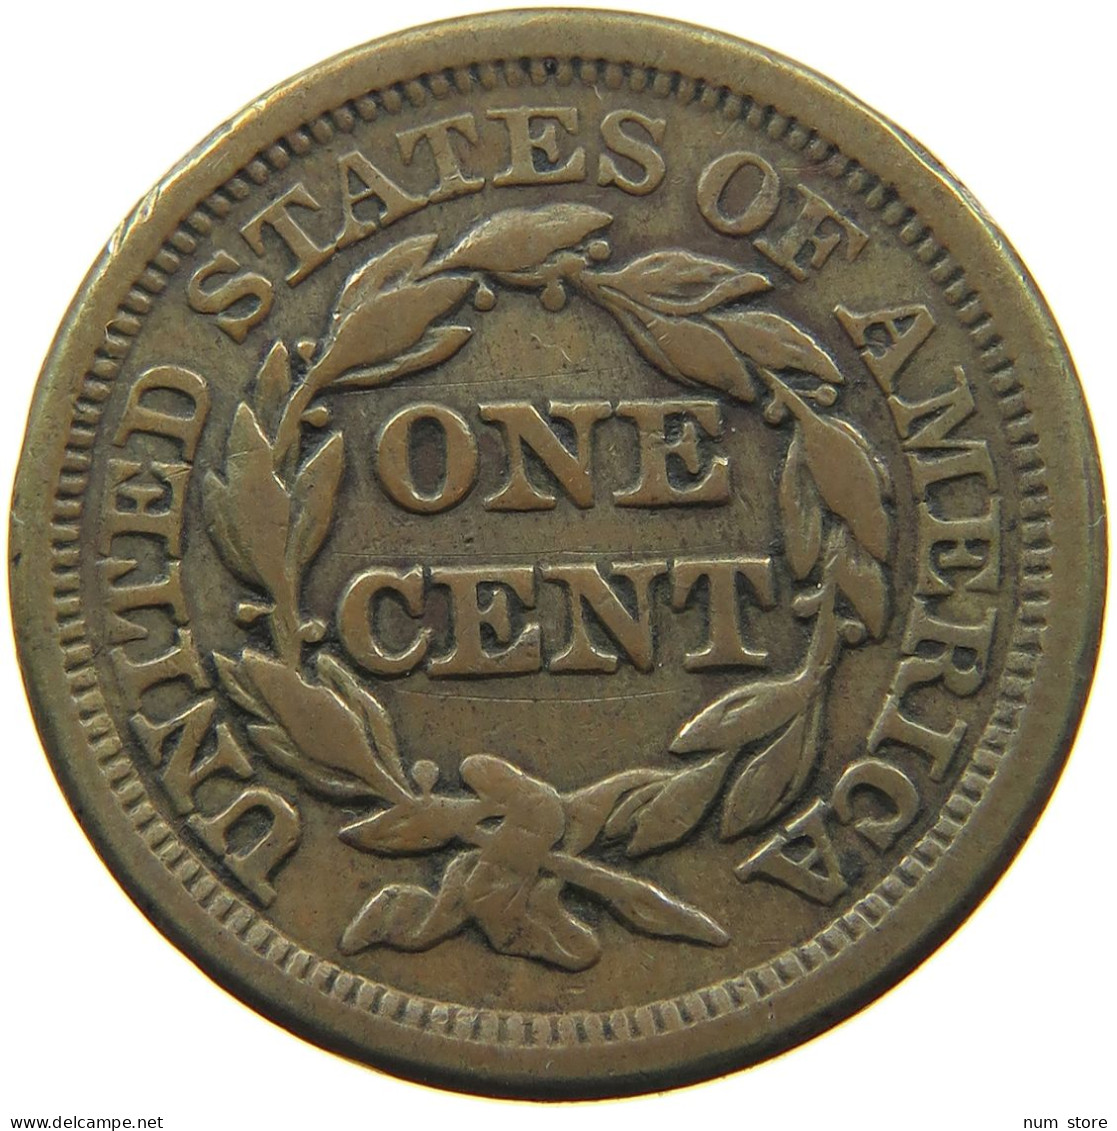 UNITED STATES OF AMERICA LARGE CENT 1854 BRAIDED HAIR #t141 0265 - 1840-1857: Braided Hair (Cheveux Tressés)